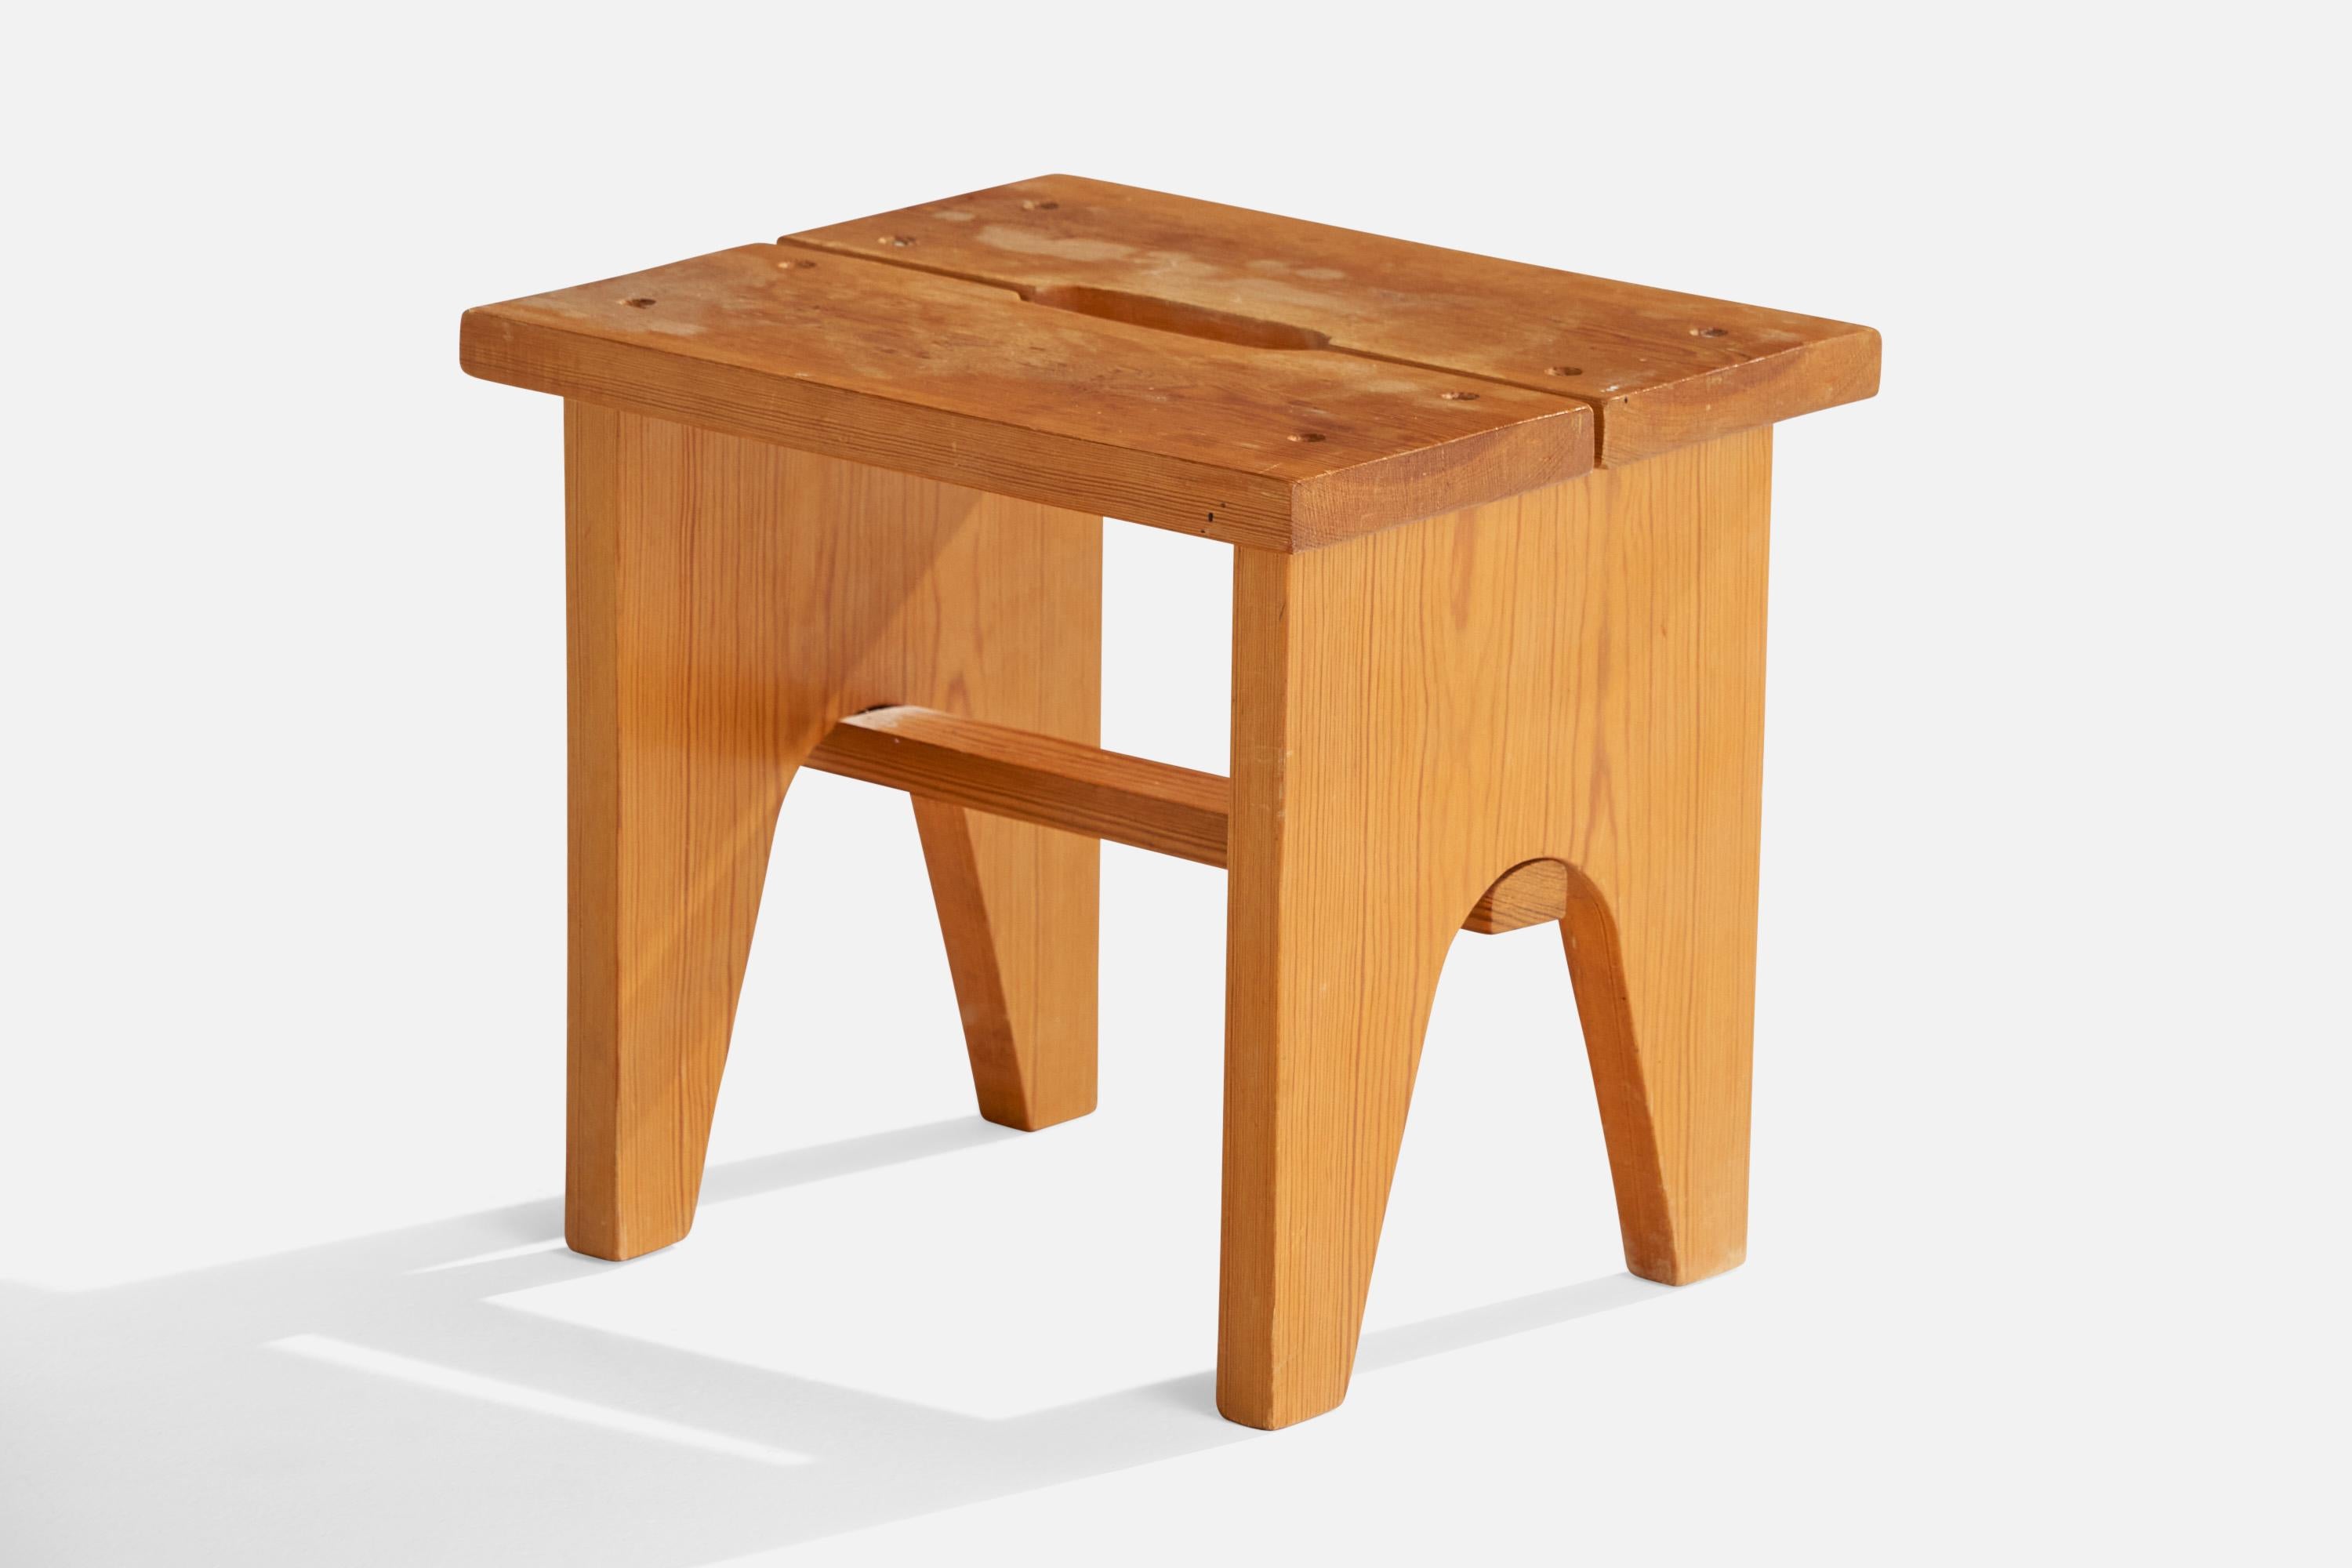 A pine stool designed and produced in Sweden, 1970s.

Seat height 10.25”.